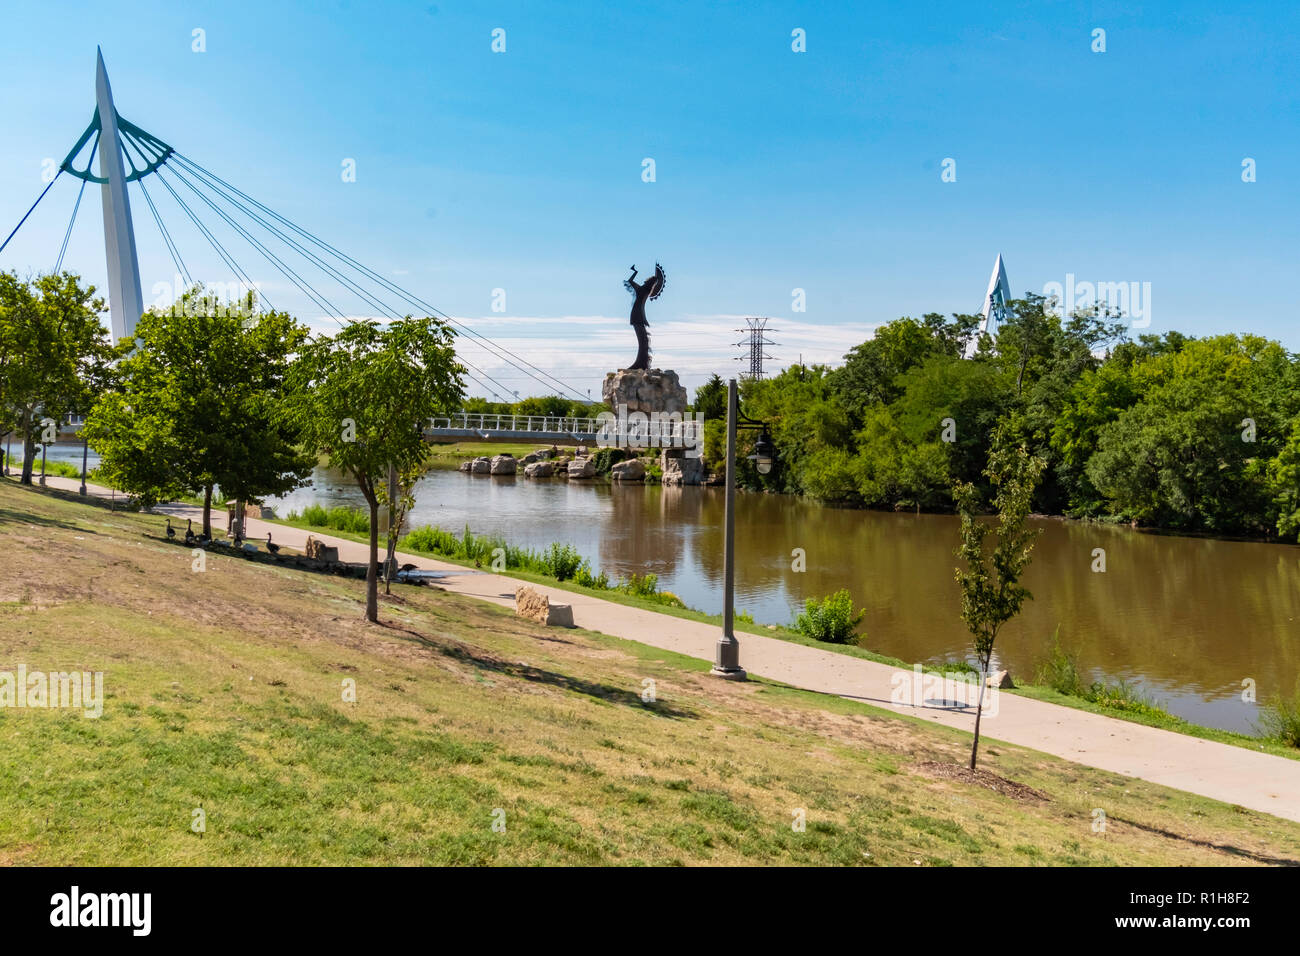 Keeper of the Plains, a steel sculpture by Blackbear Bosin. Wichita, Kansas, USA. From the south shore of the Arkansas River. Stock Photo